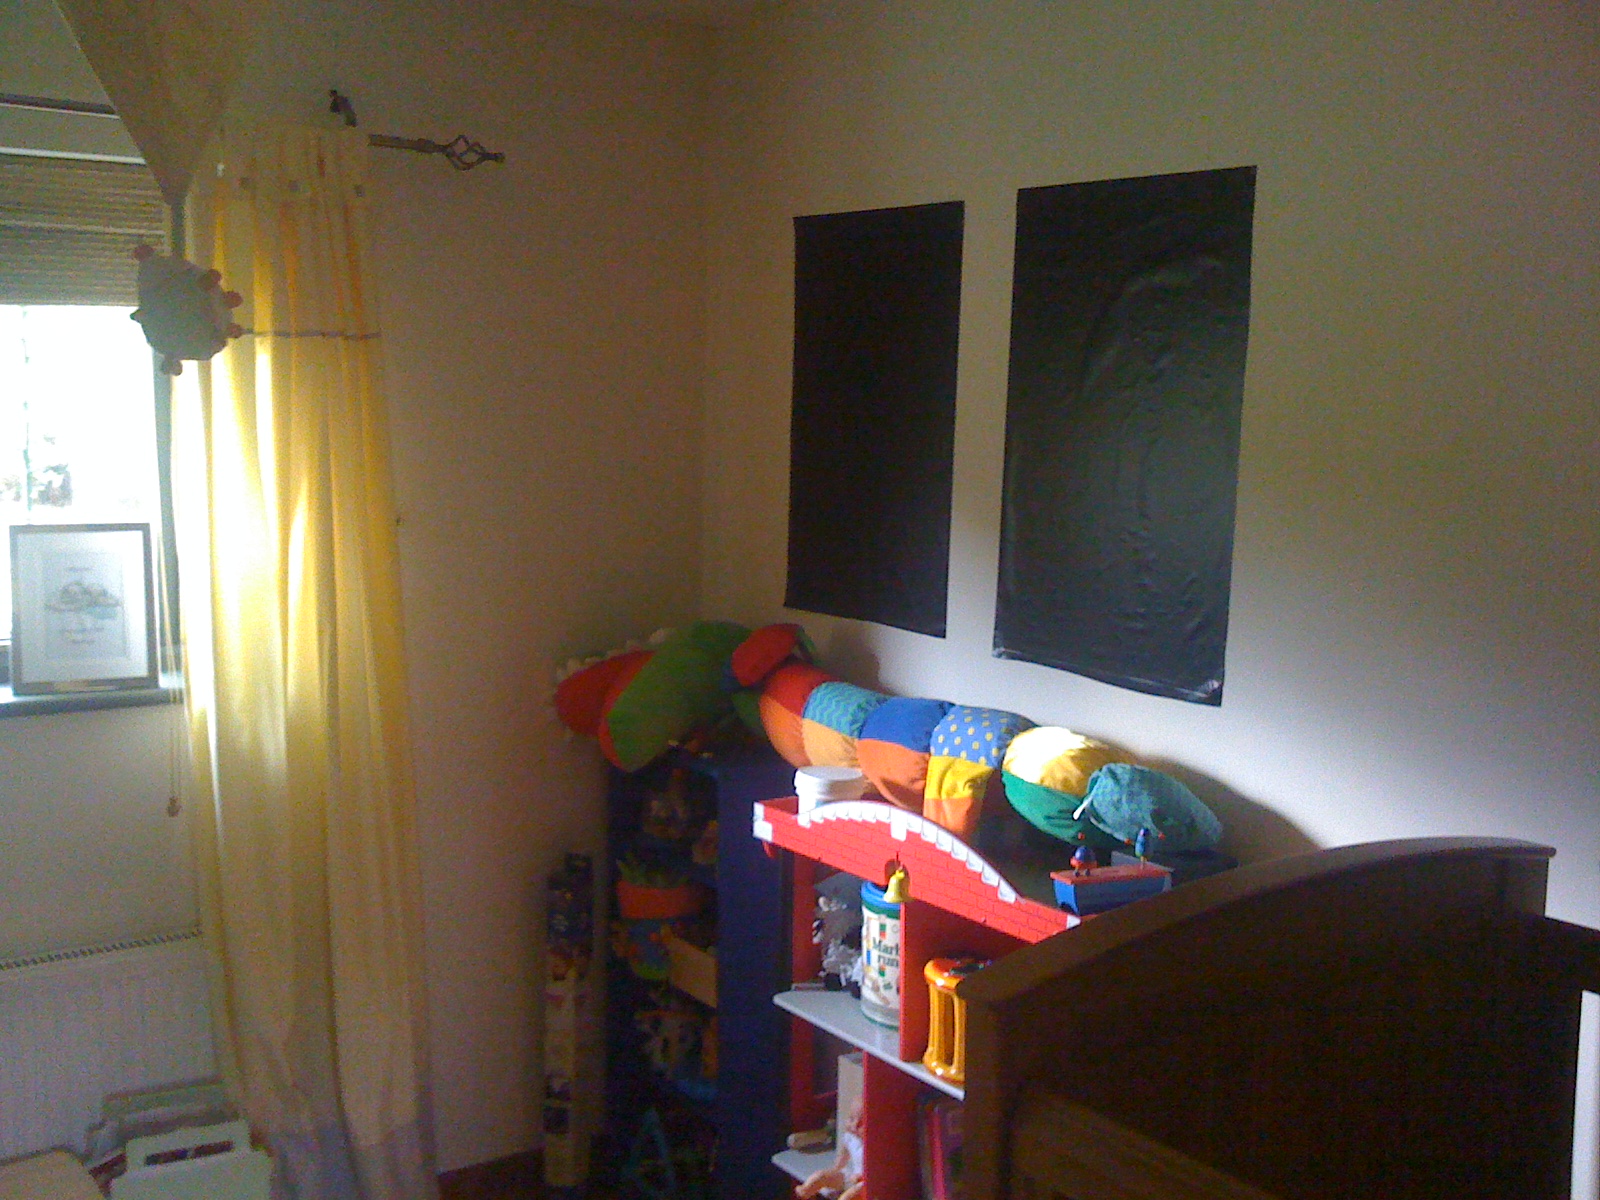 Magic Blackout Blind stuck to a wall in nursery when not in use on window